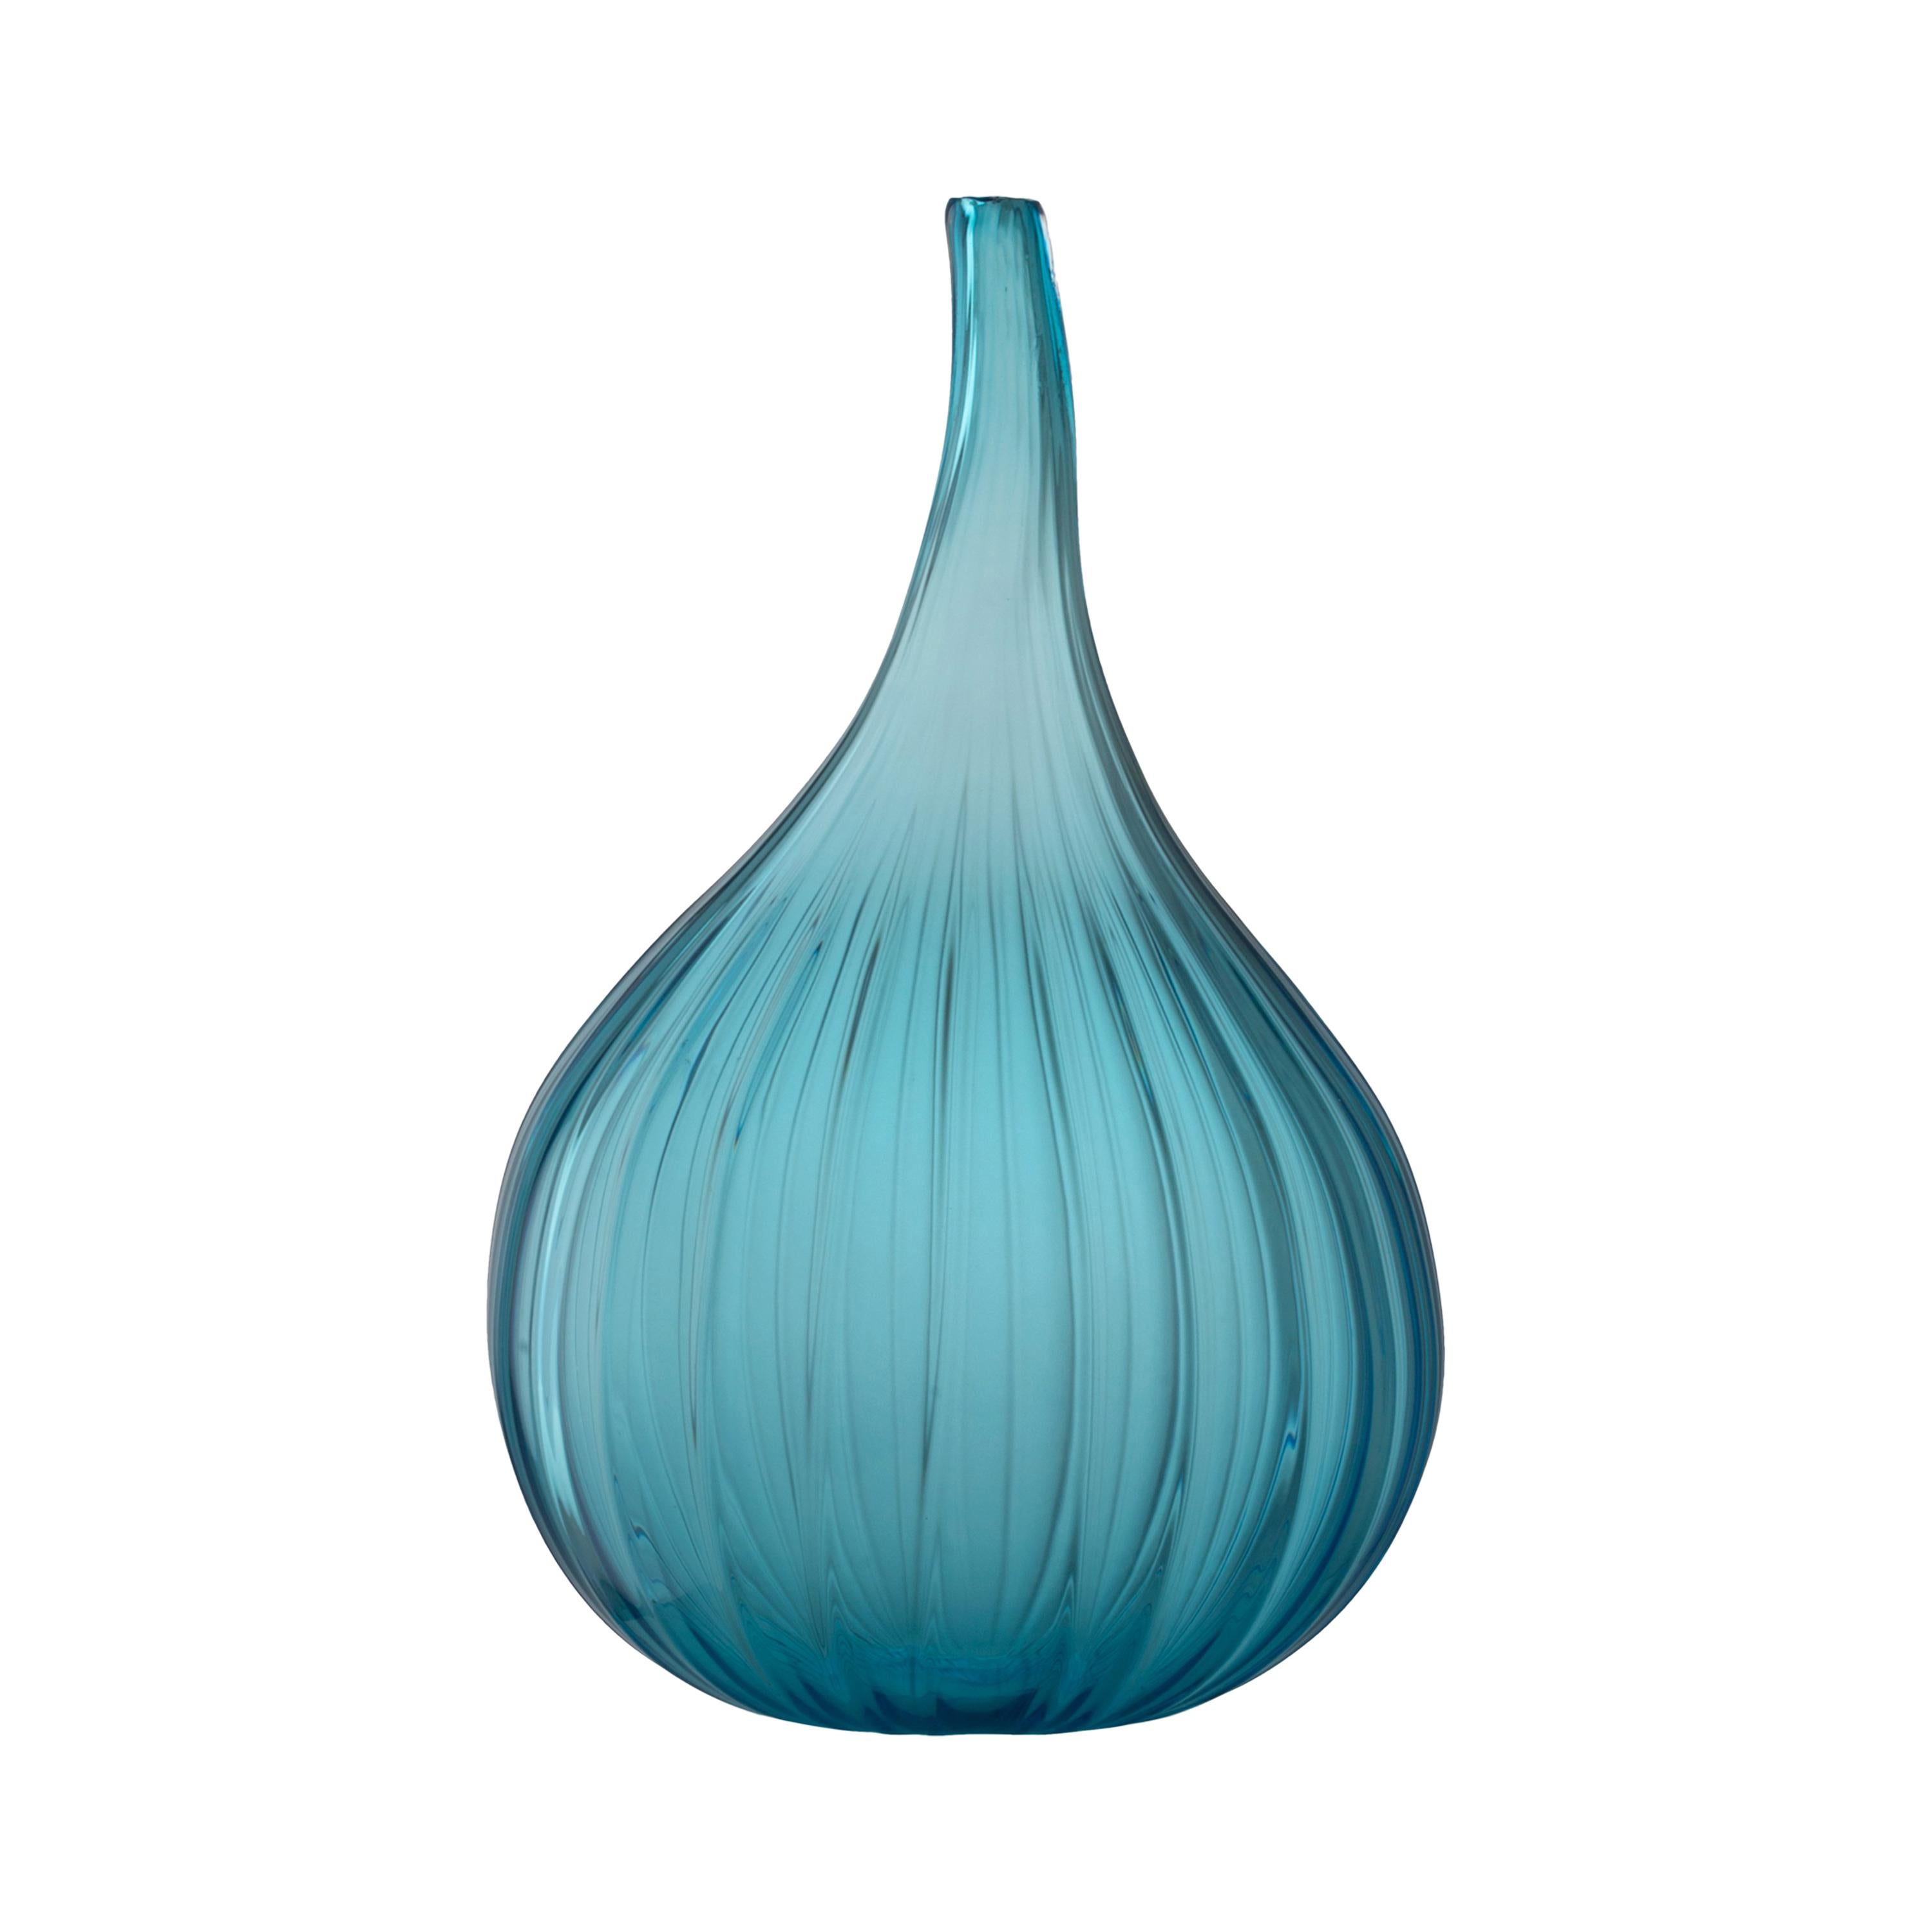 Salviati Drops Large Glass Vase in Teal by Renzo Stellon For Sale